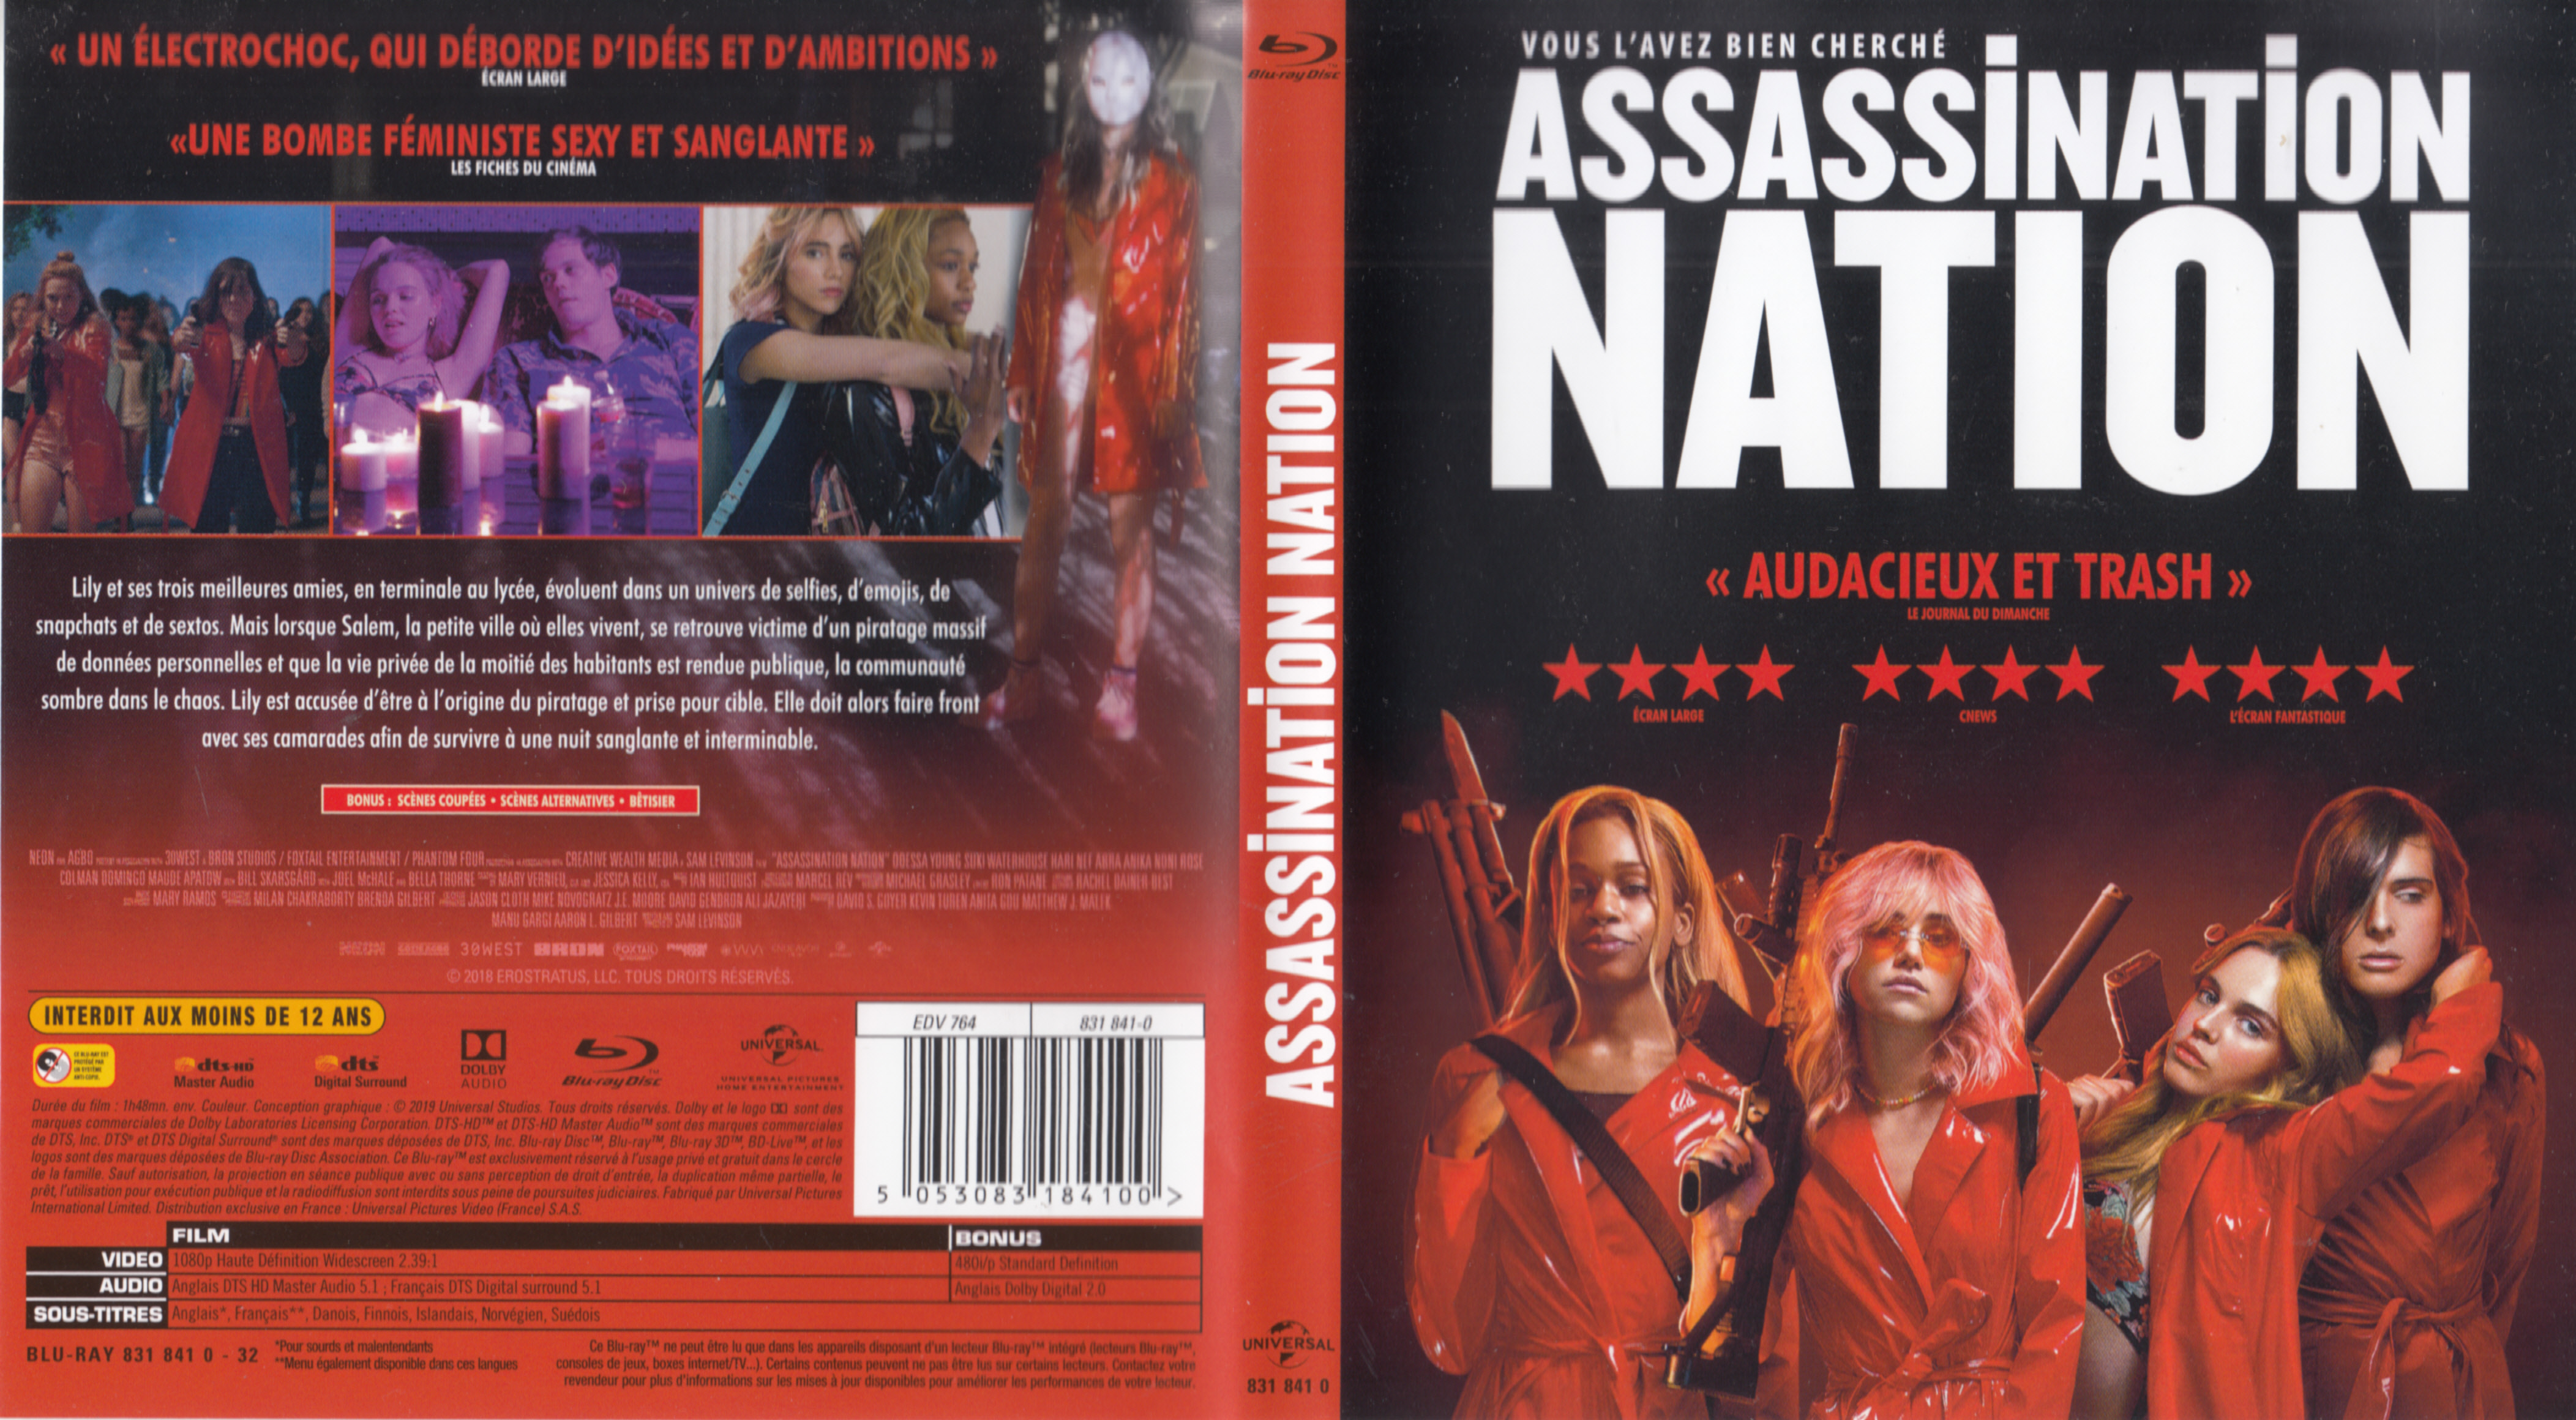 Jaquette DVD Assassination nation (BLU-RAY)